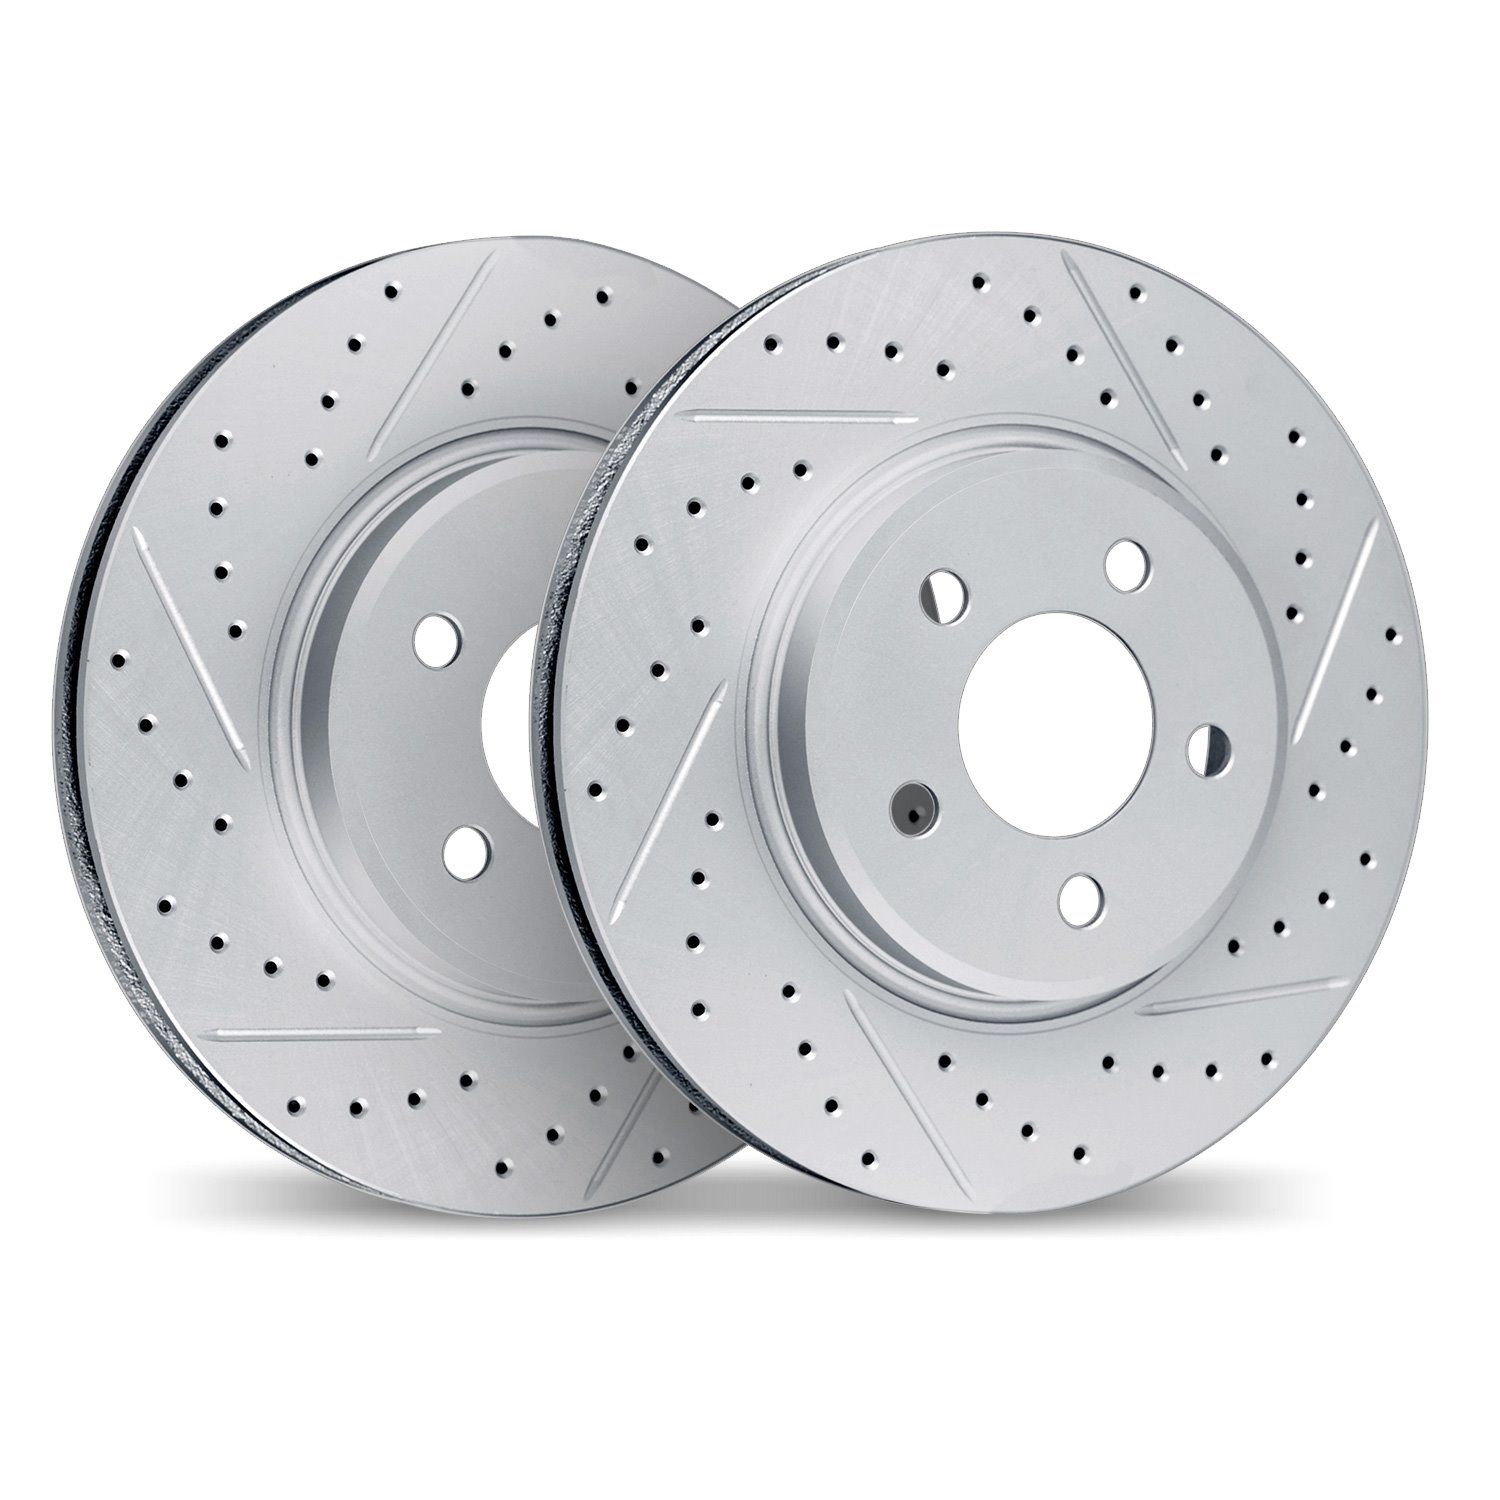 2002-68005 Geoperformance Drilled/Slotted Brake Rotors, Fits Select Infiniti/Nissan, Position: Front